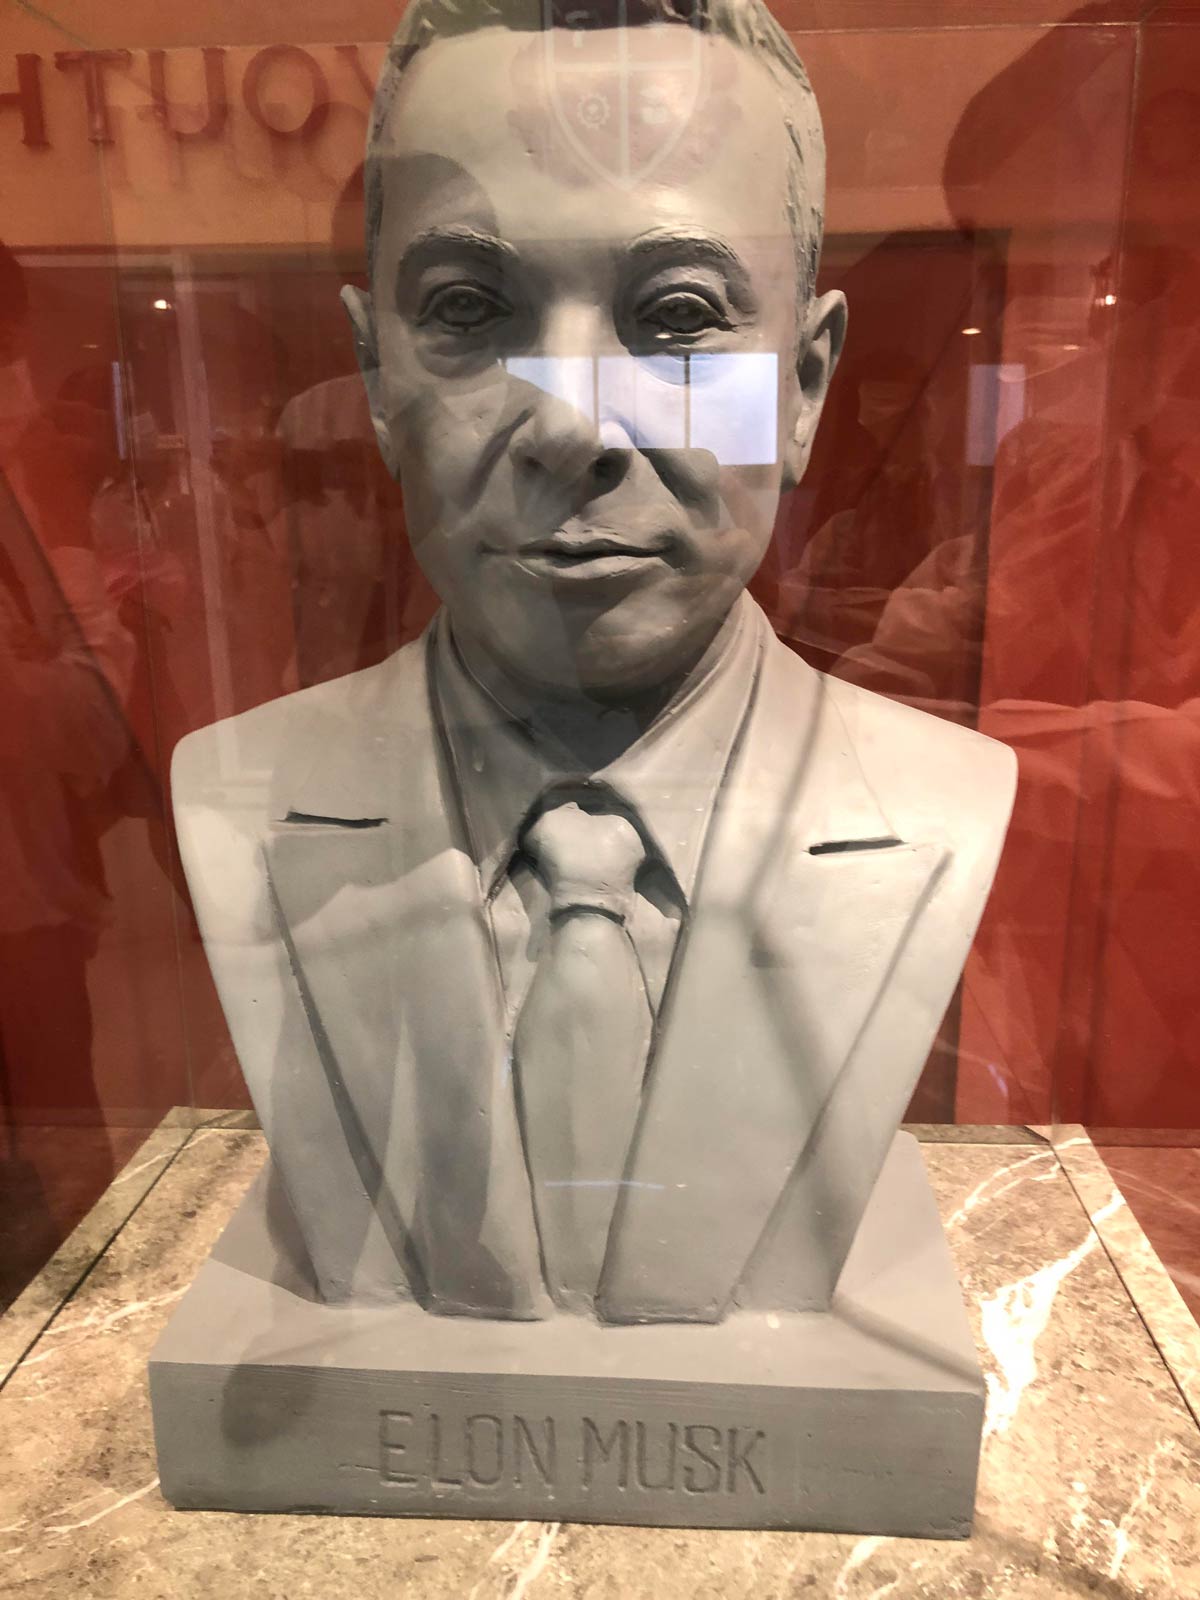 This Elon Musk bust at my school